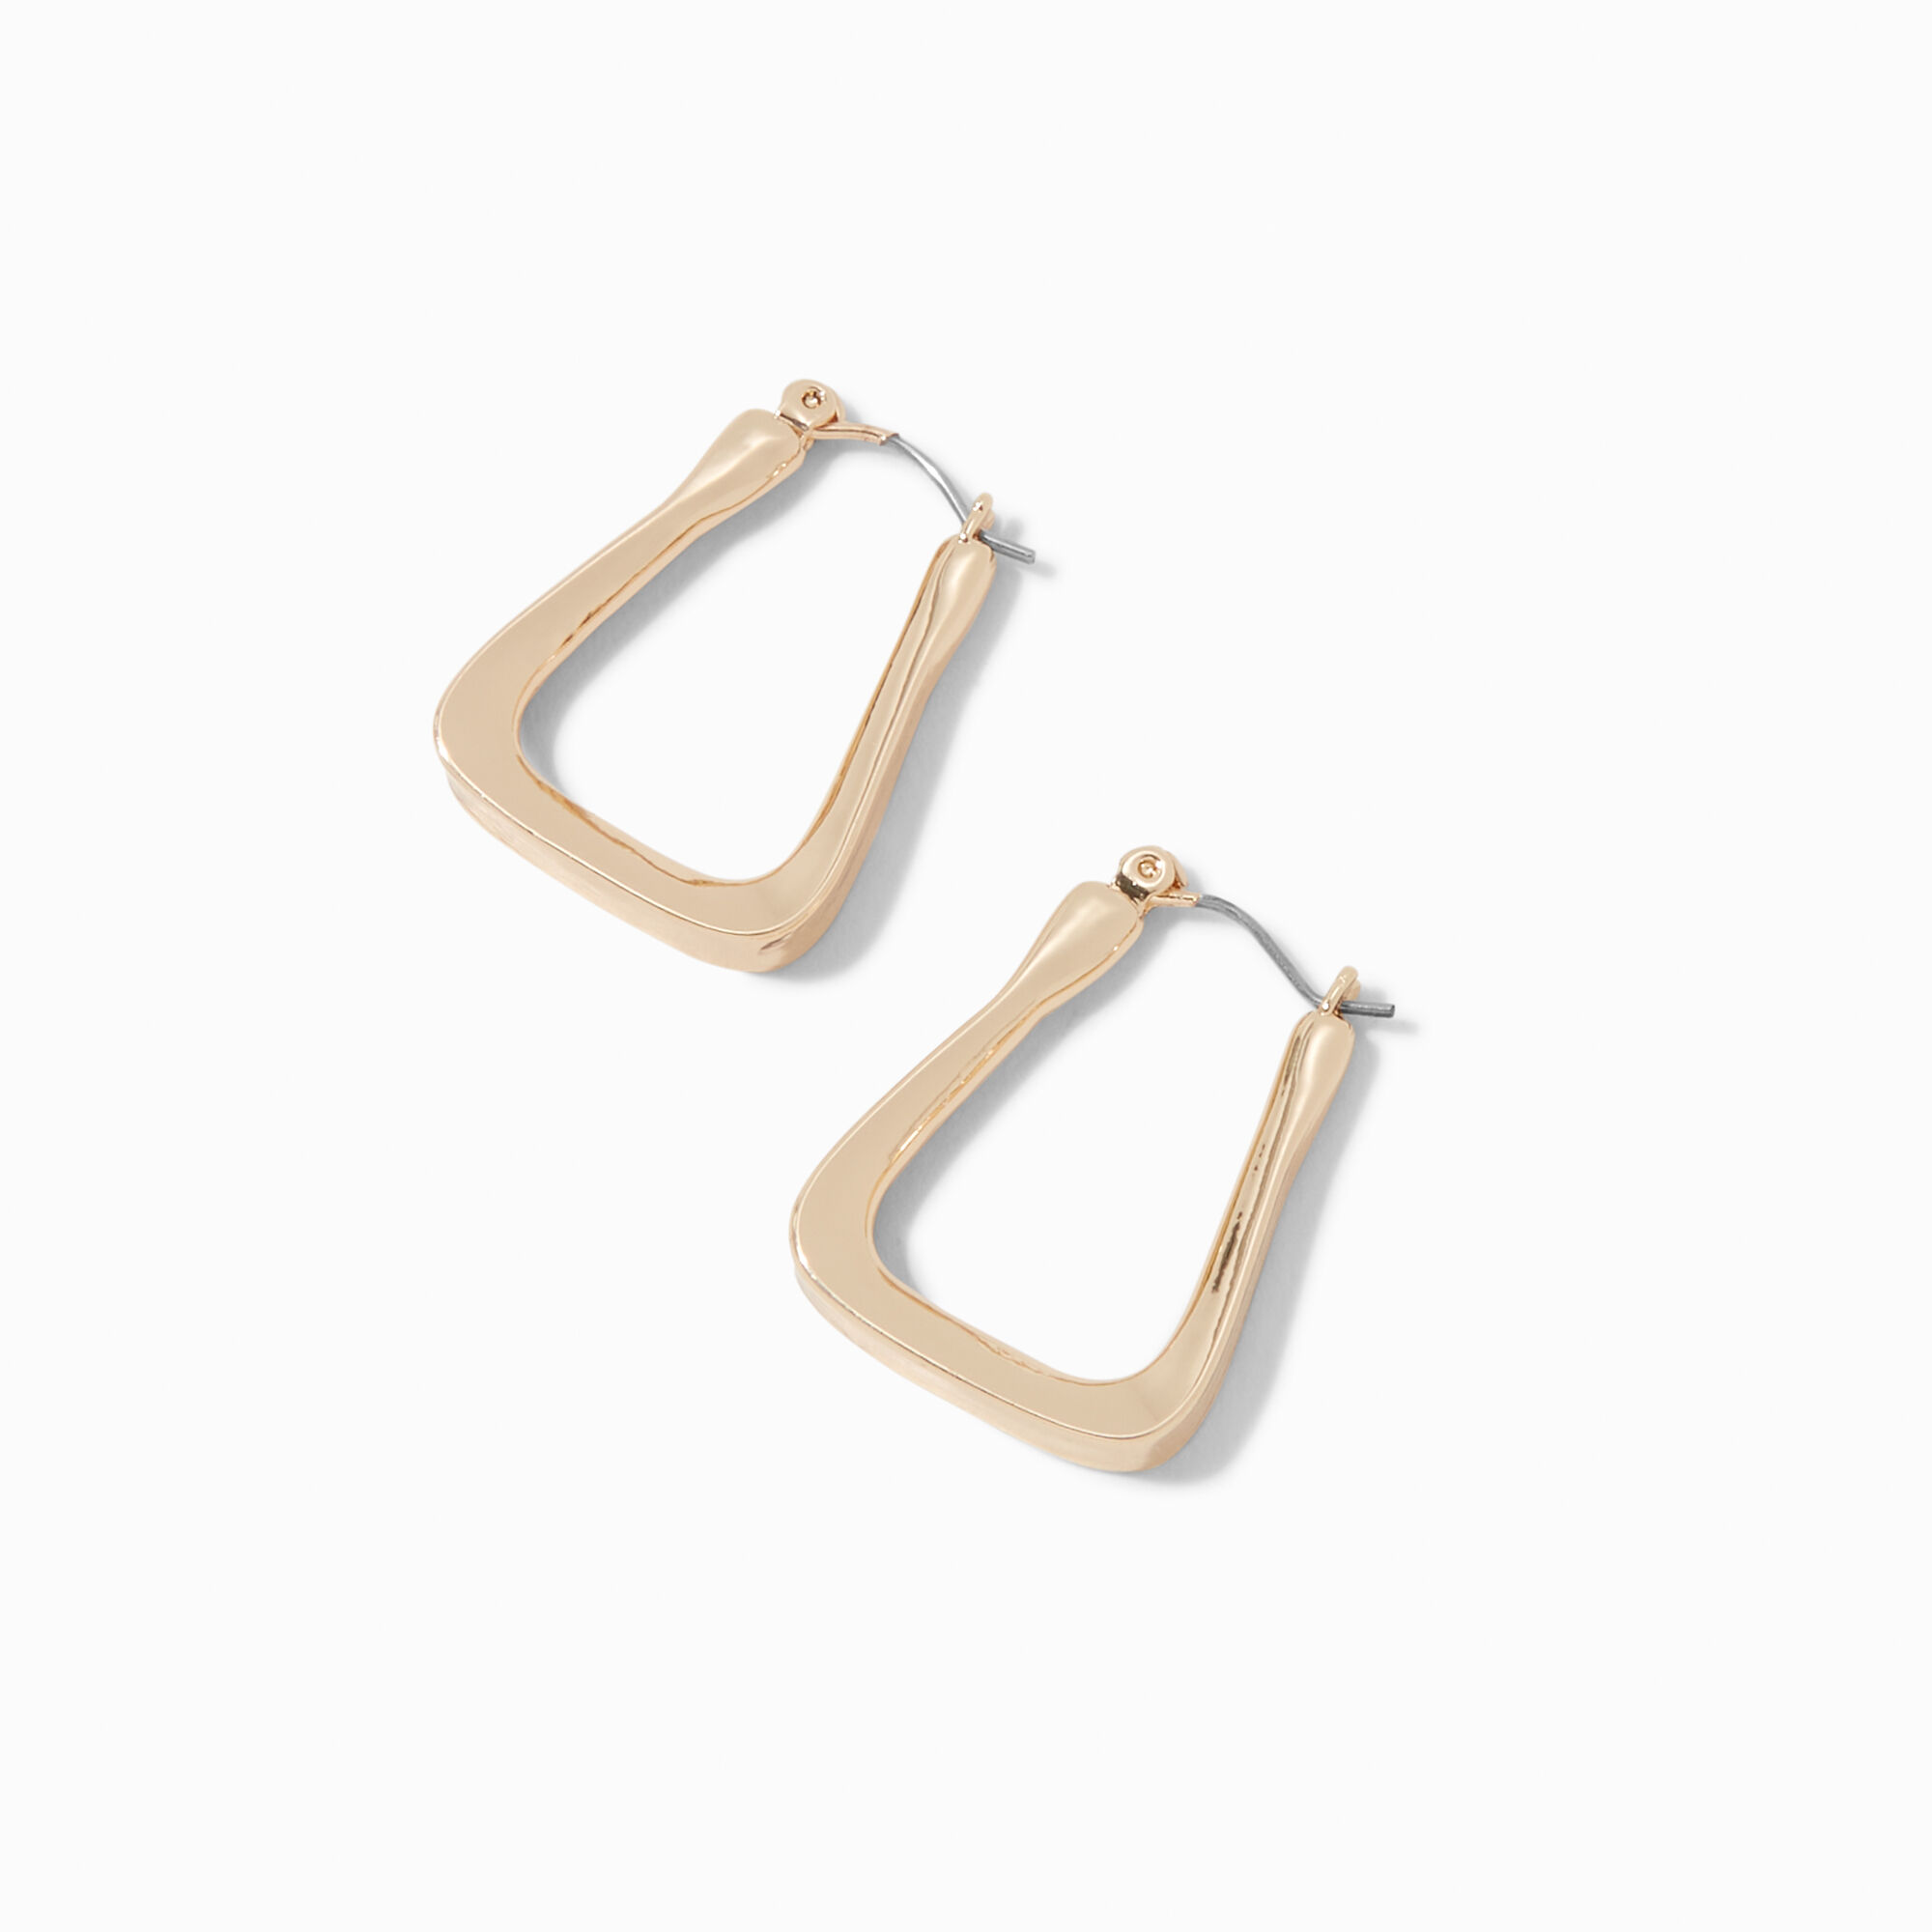 View Claires Tone Triangular Oval 30MM Hoop Earrings Gold information